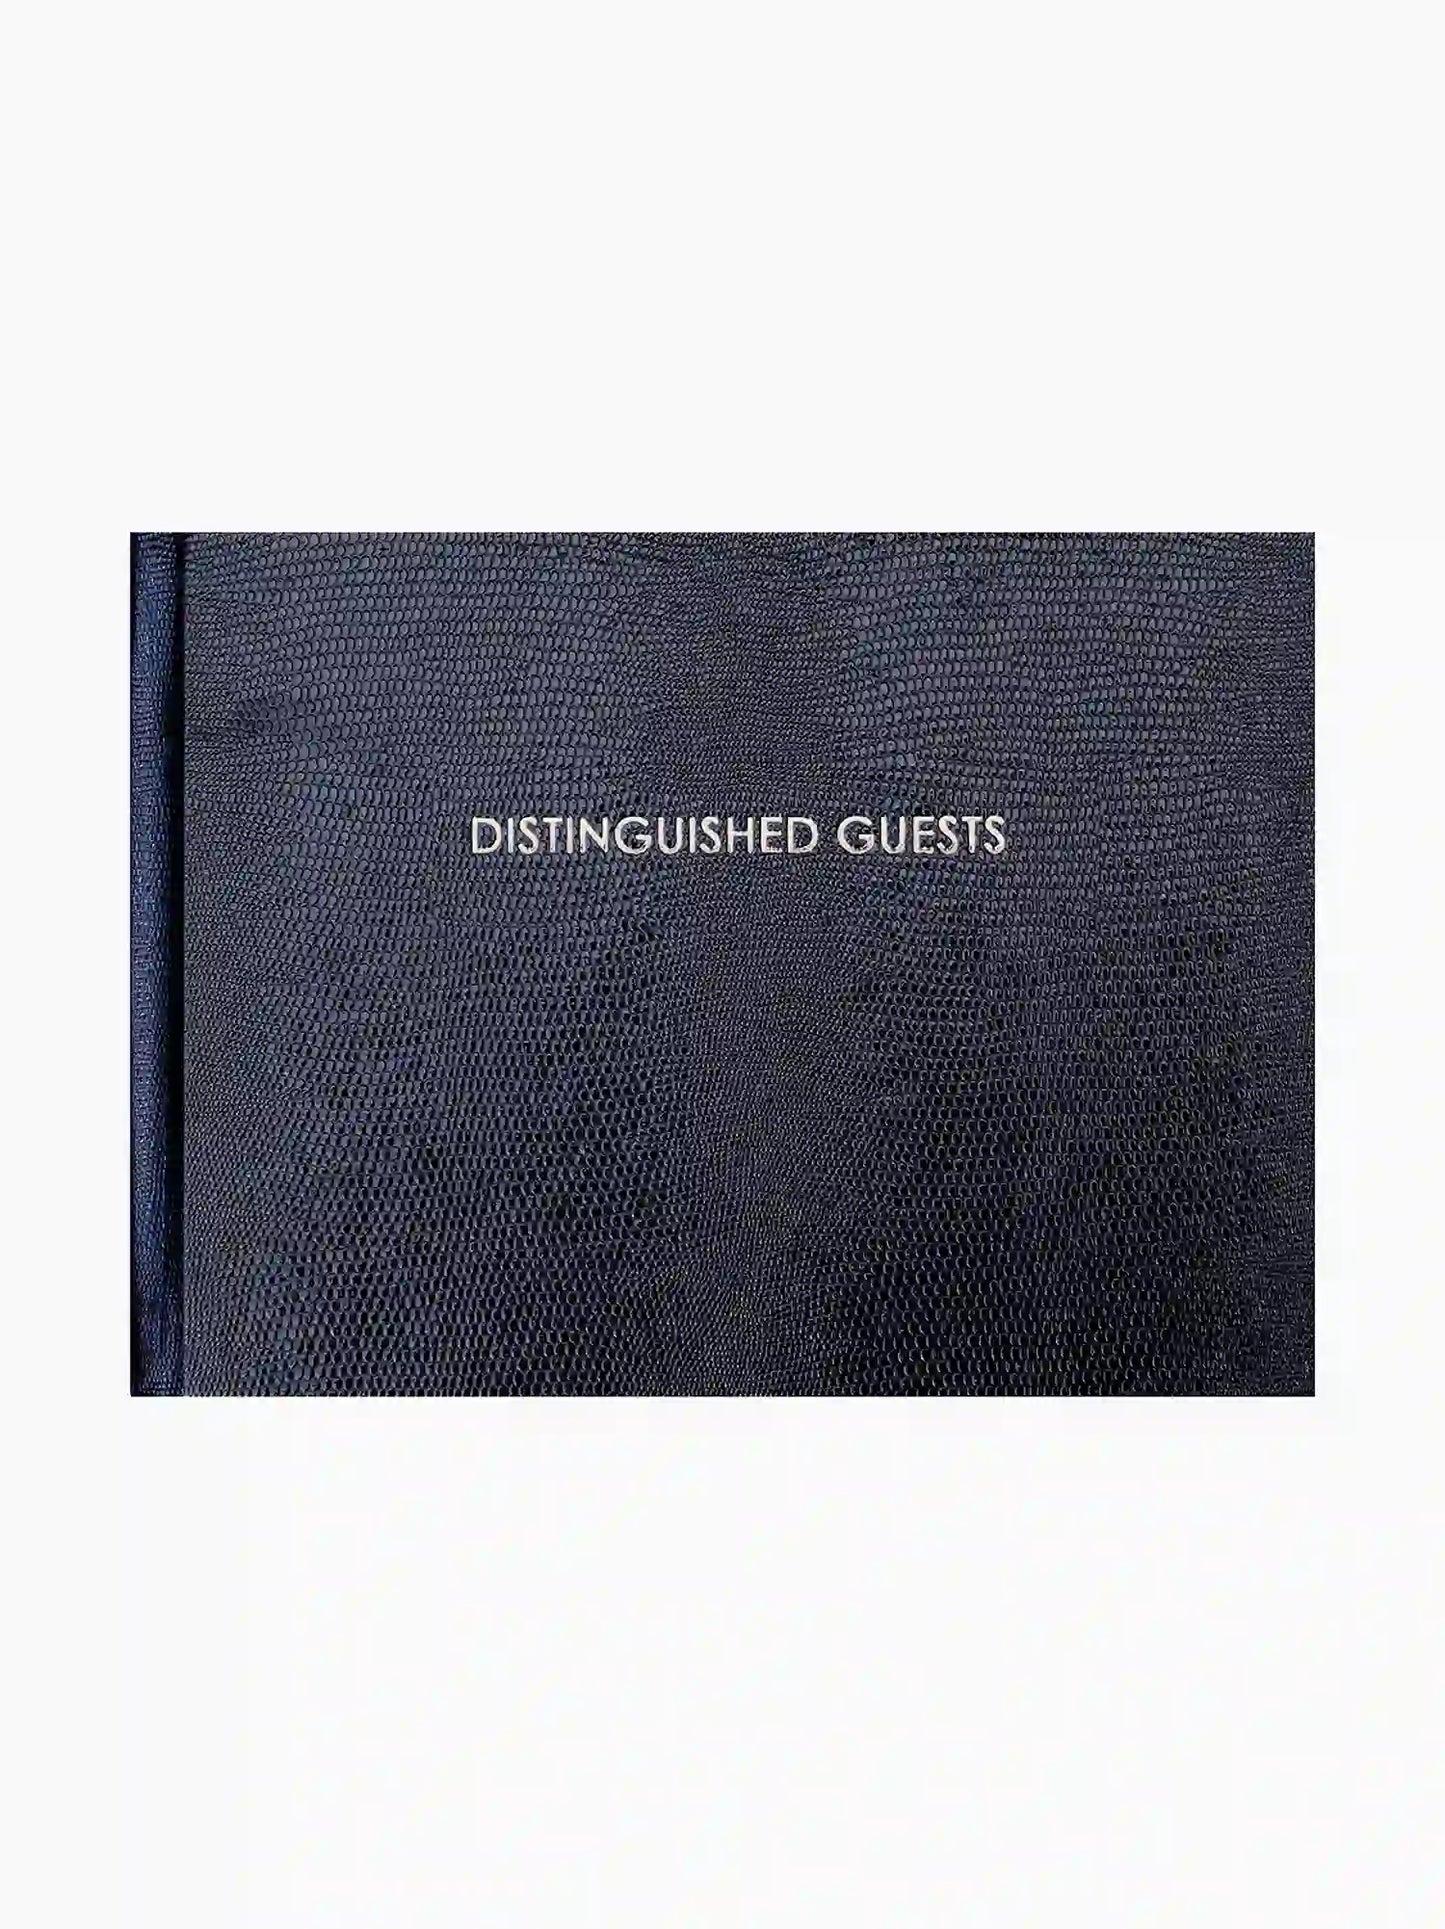 Distinguished Guest Book